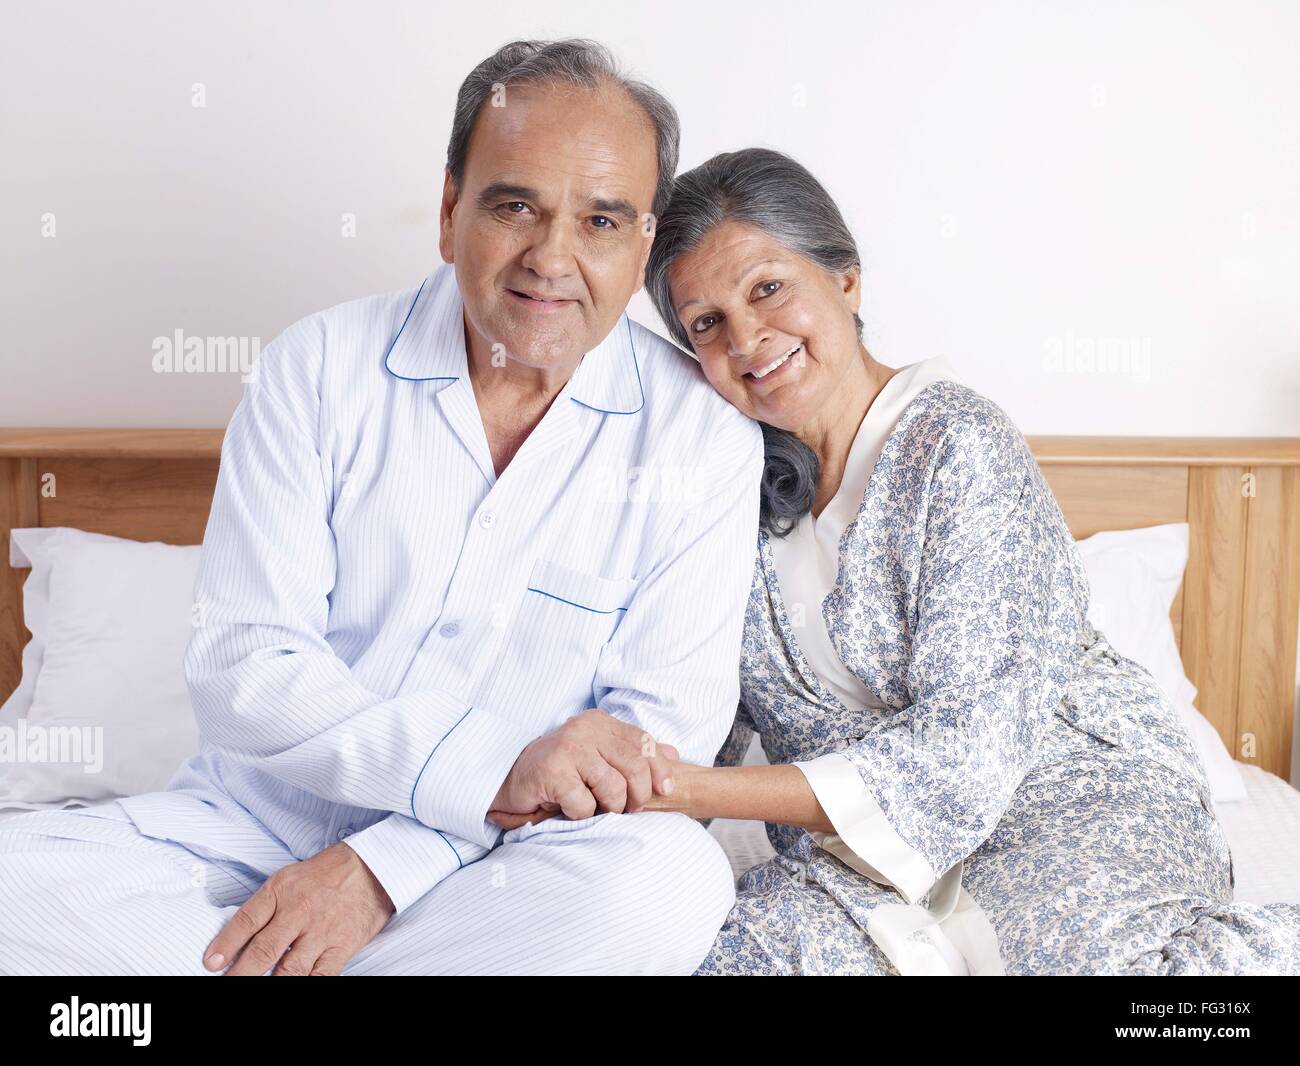 Old couple holding hands sitting close to each other on bed MR#702T,702S Stock Photo